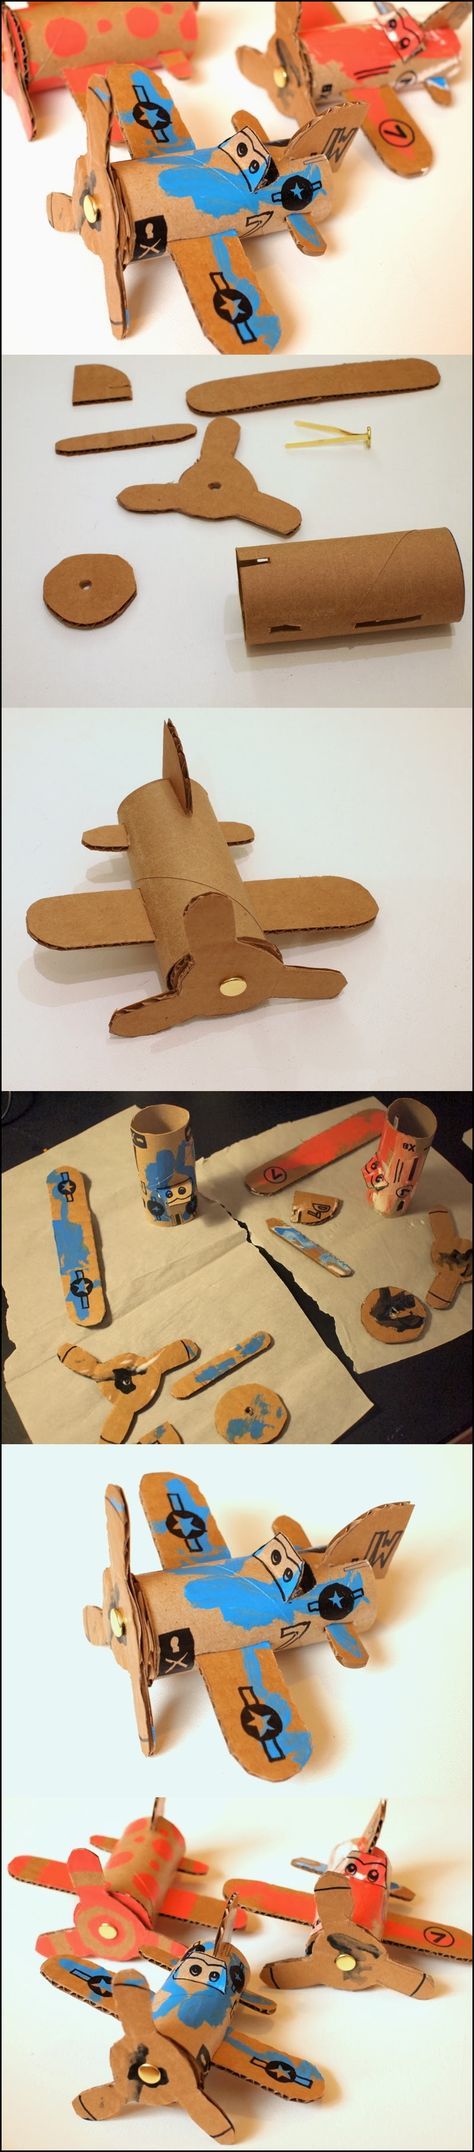 Making Adorable Airplanes Using Toilet Paper Roll Cardboard Toy Crafts